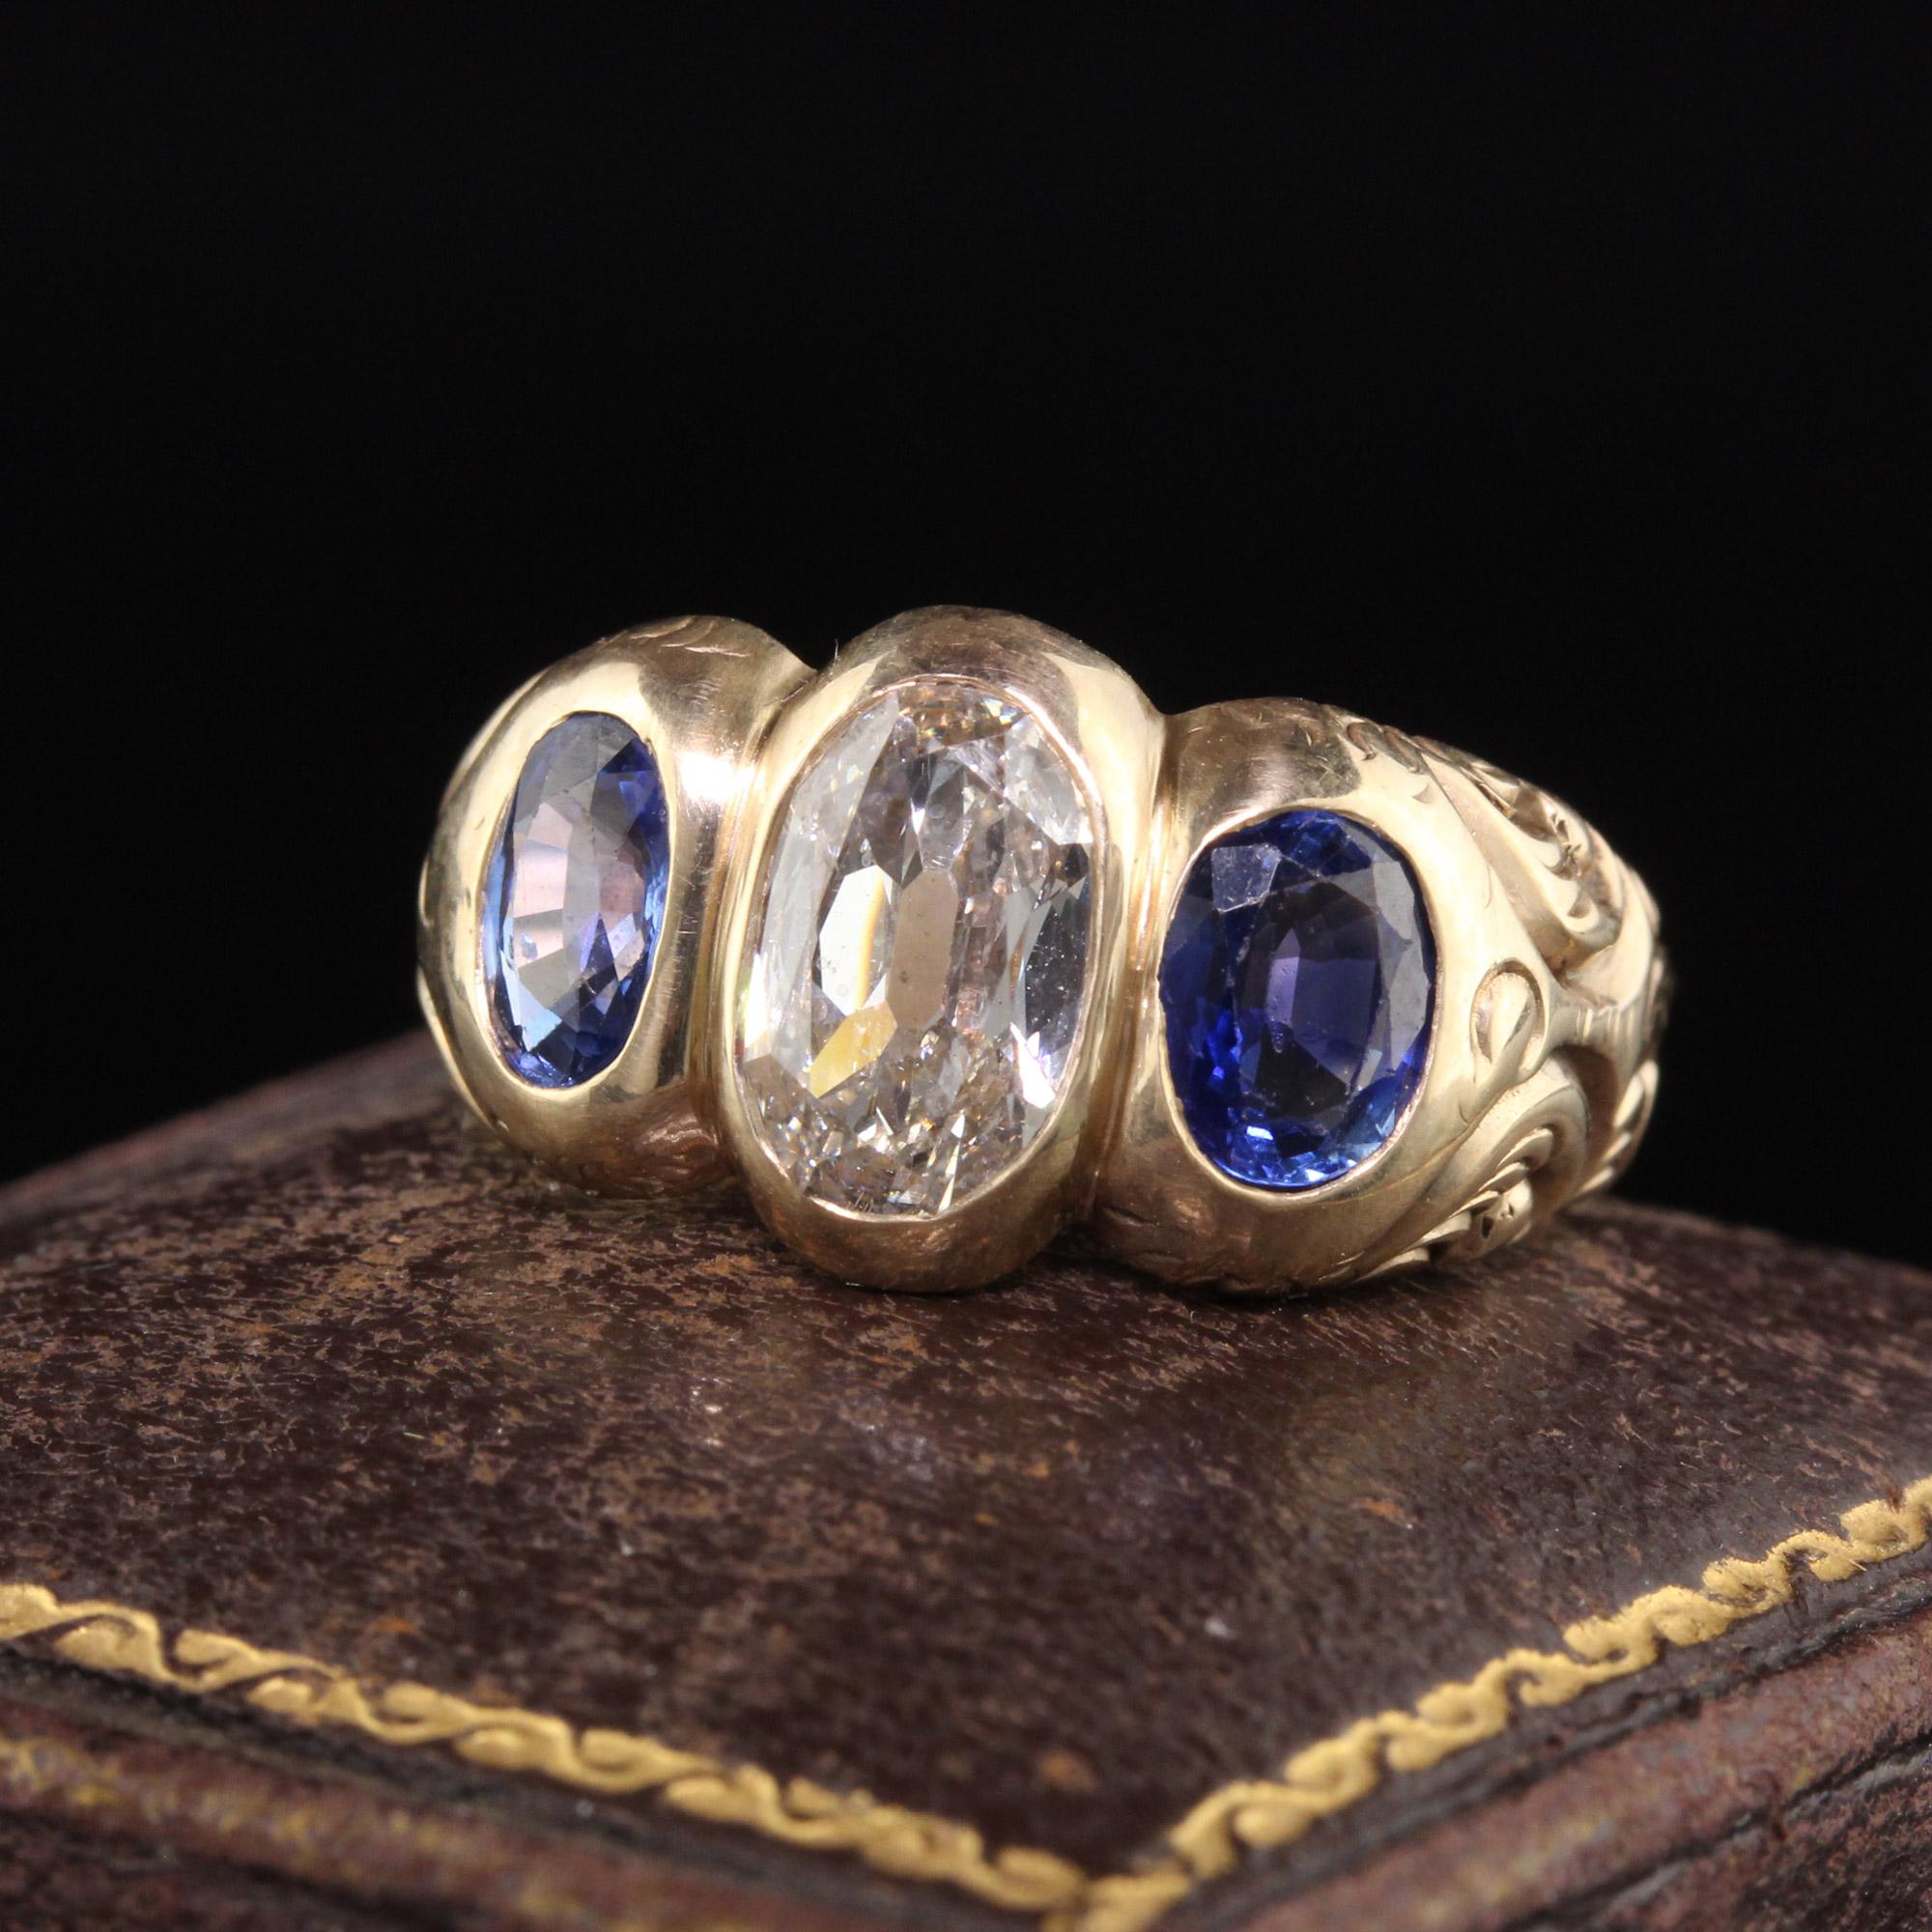 Beautiful Antique Victorian 10K Yellow Gold Old Cut Diamond Sapphire Three Stone Ring. This gorgeous three stone ring is crafted in 10K yellow gold. The center diamond is an old cut oval and the sides are natural blue sapphires in a gorgeous